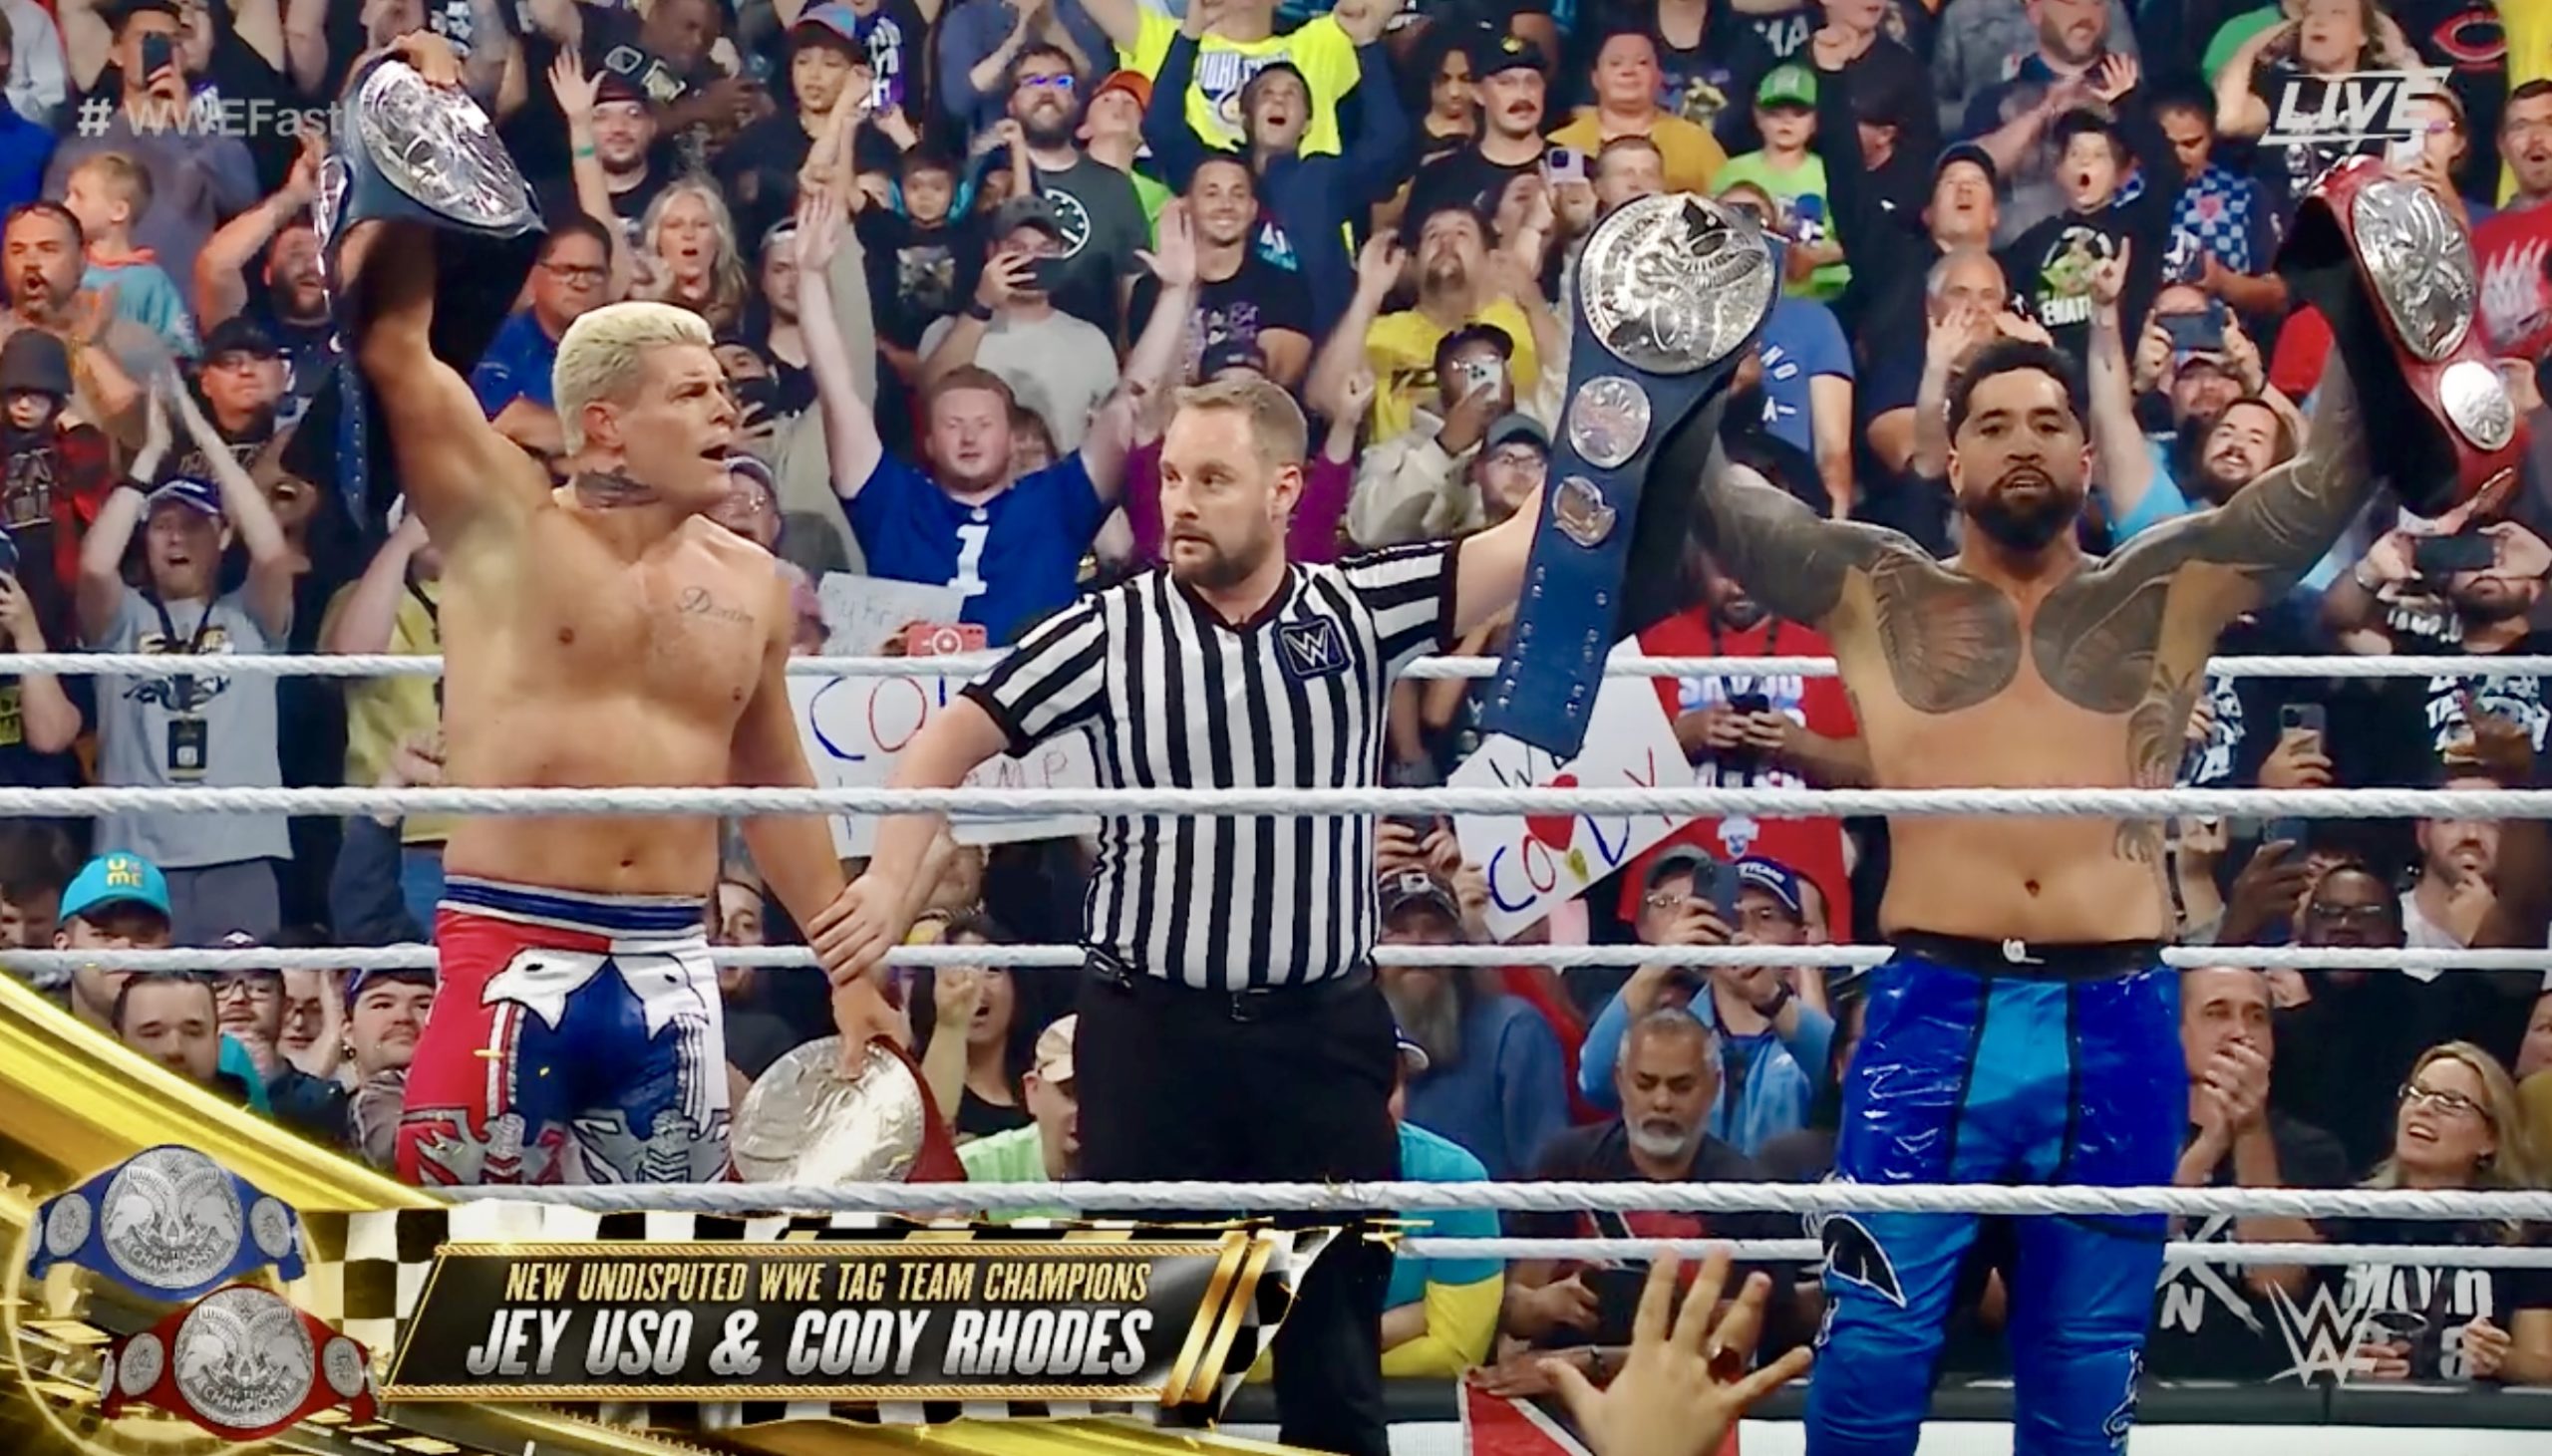 Cody Rhodes and Jey Uso win the Undisputed WWE Tag Team Titles at Fastlane